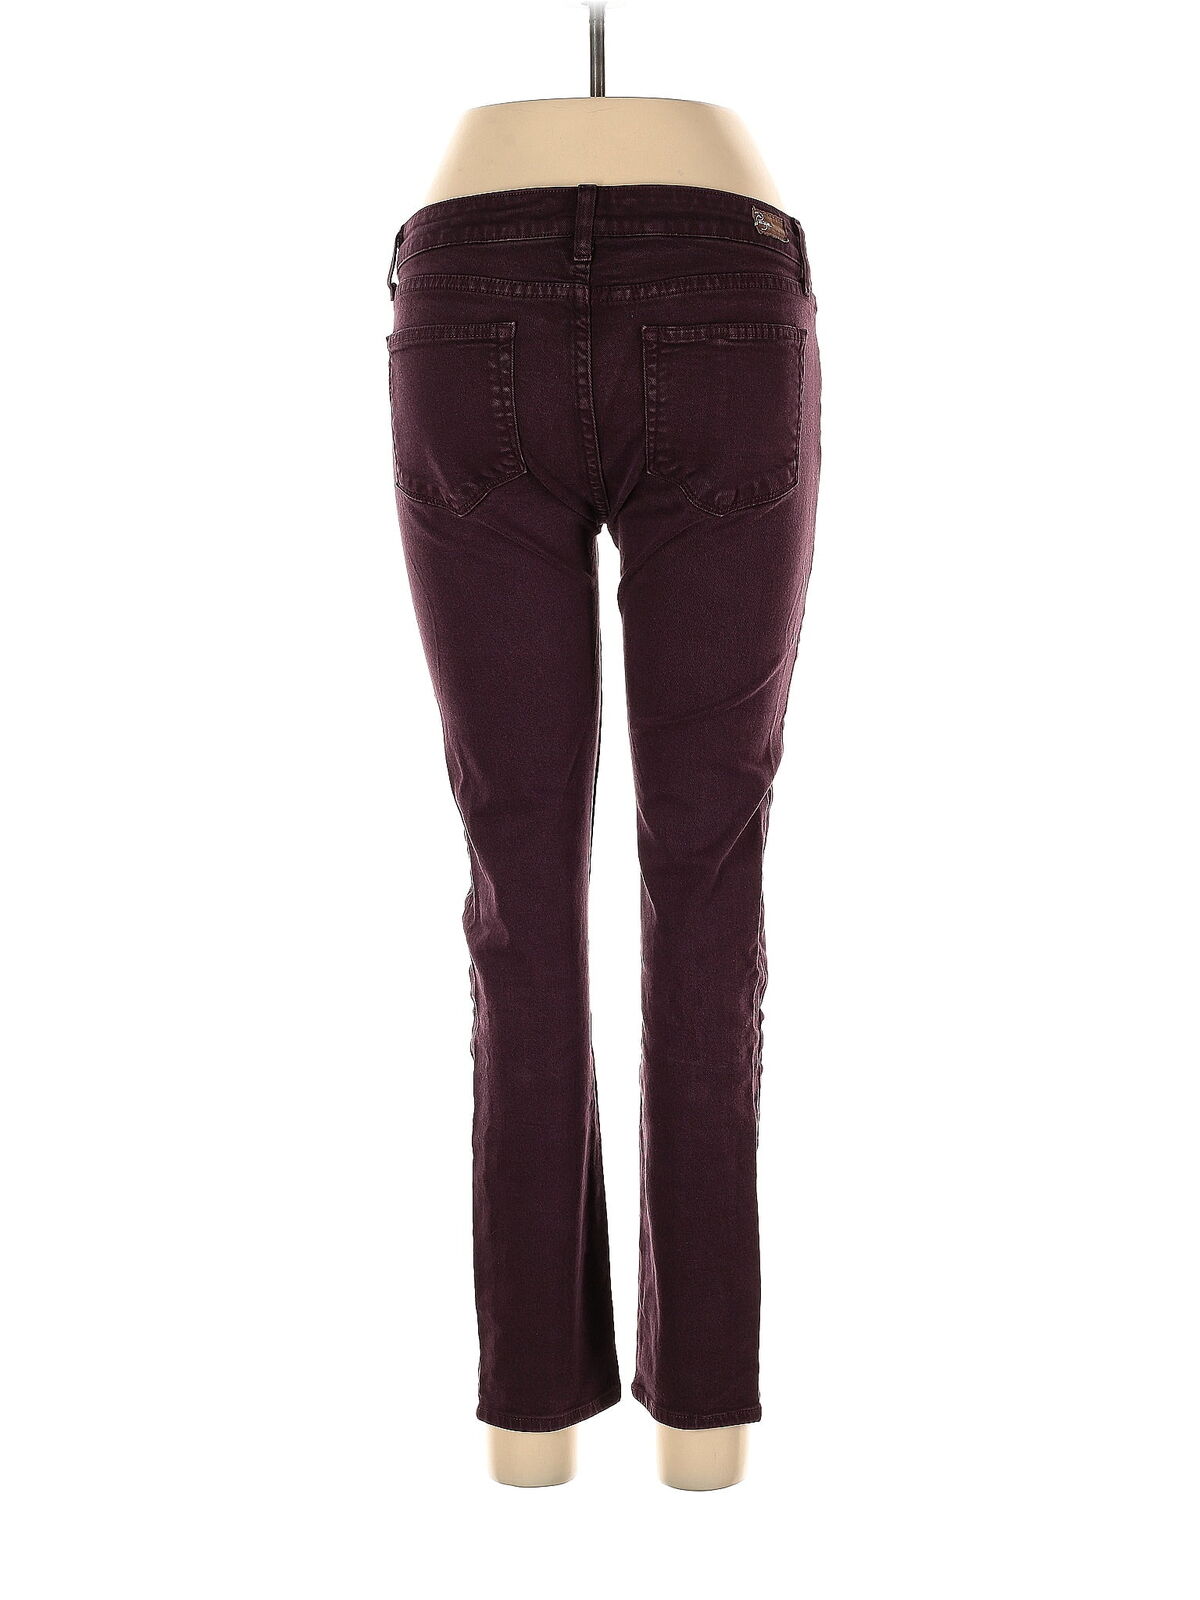 Paige Women Red Jeans 30W - image 2